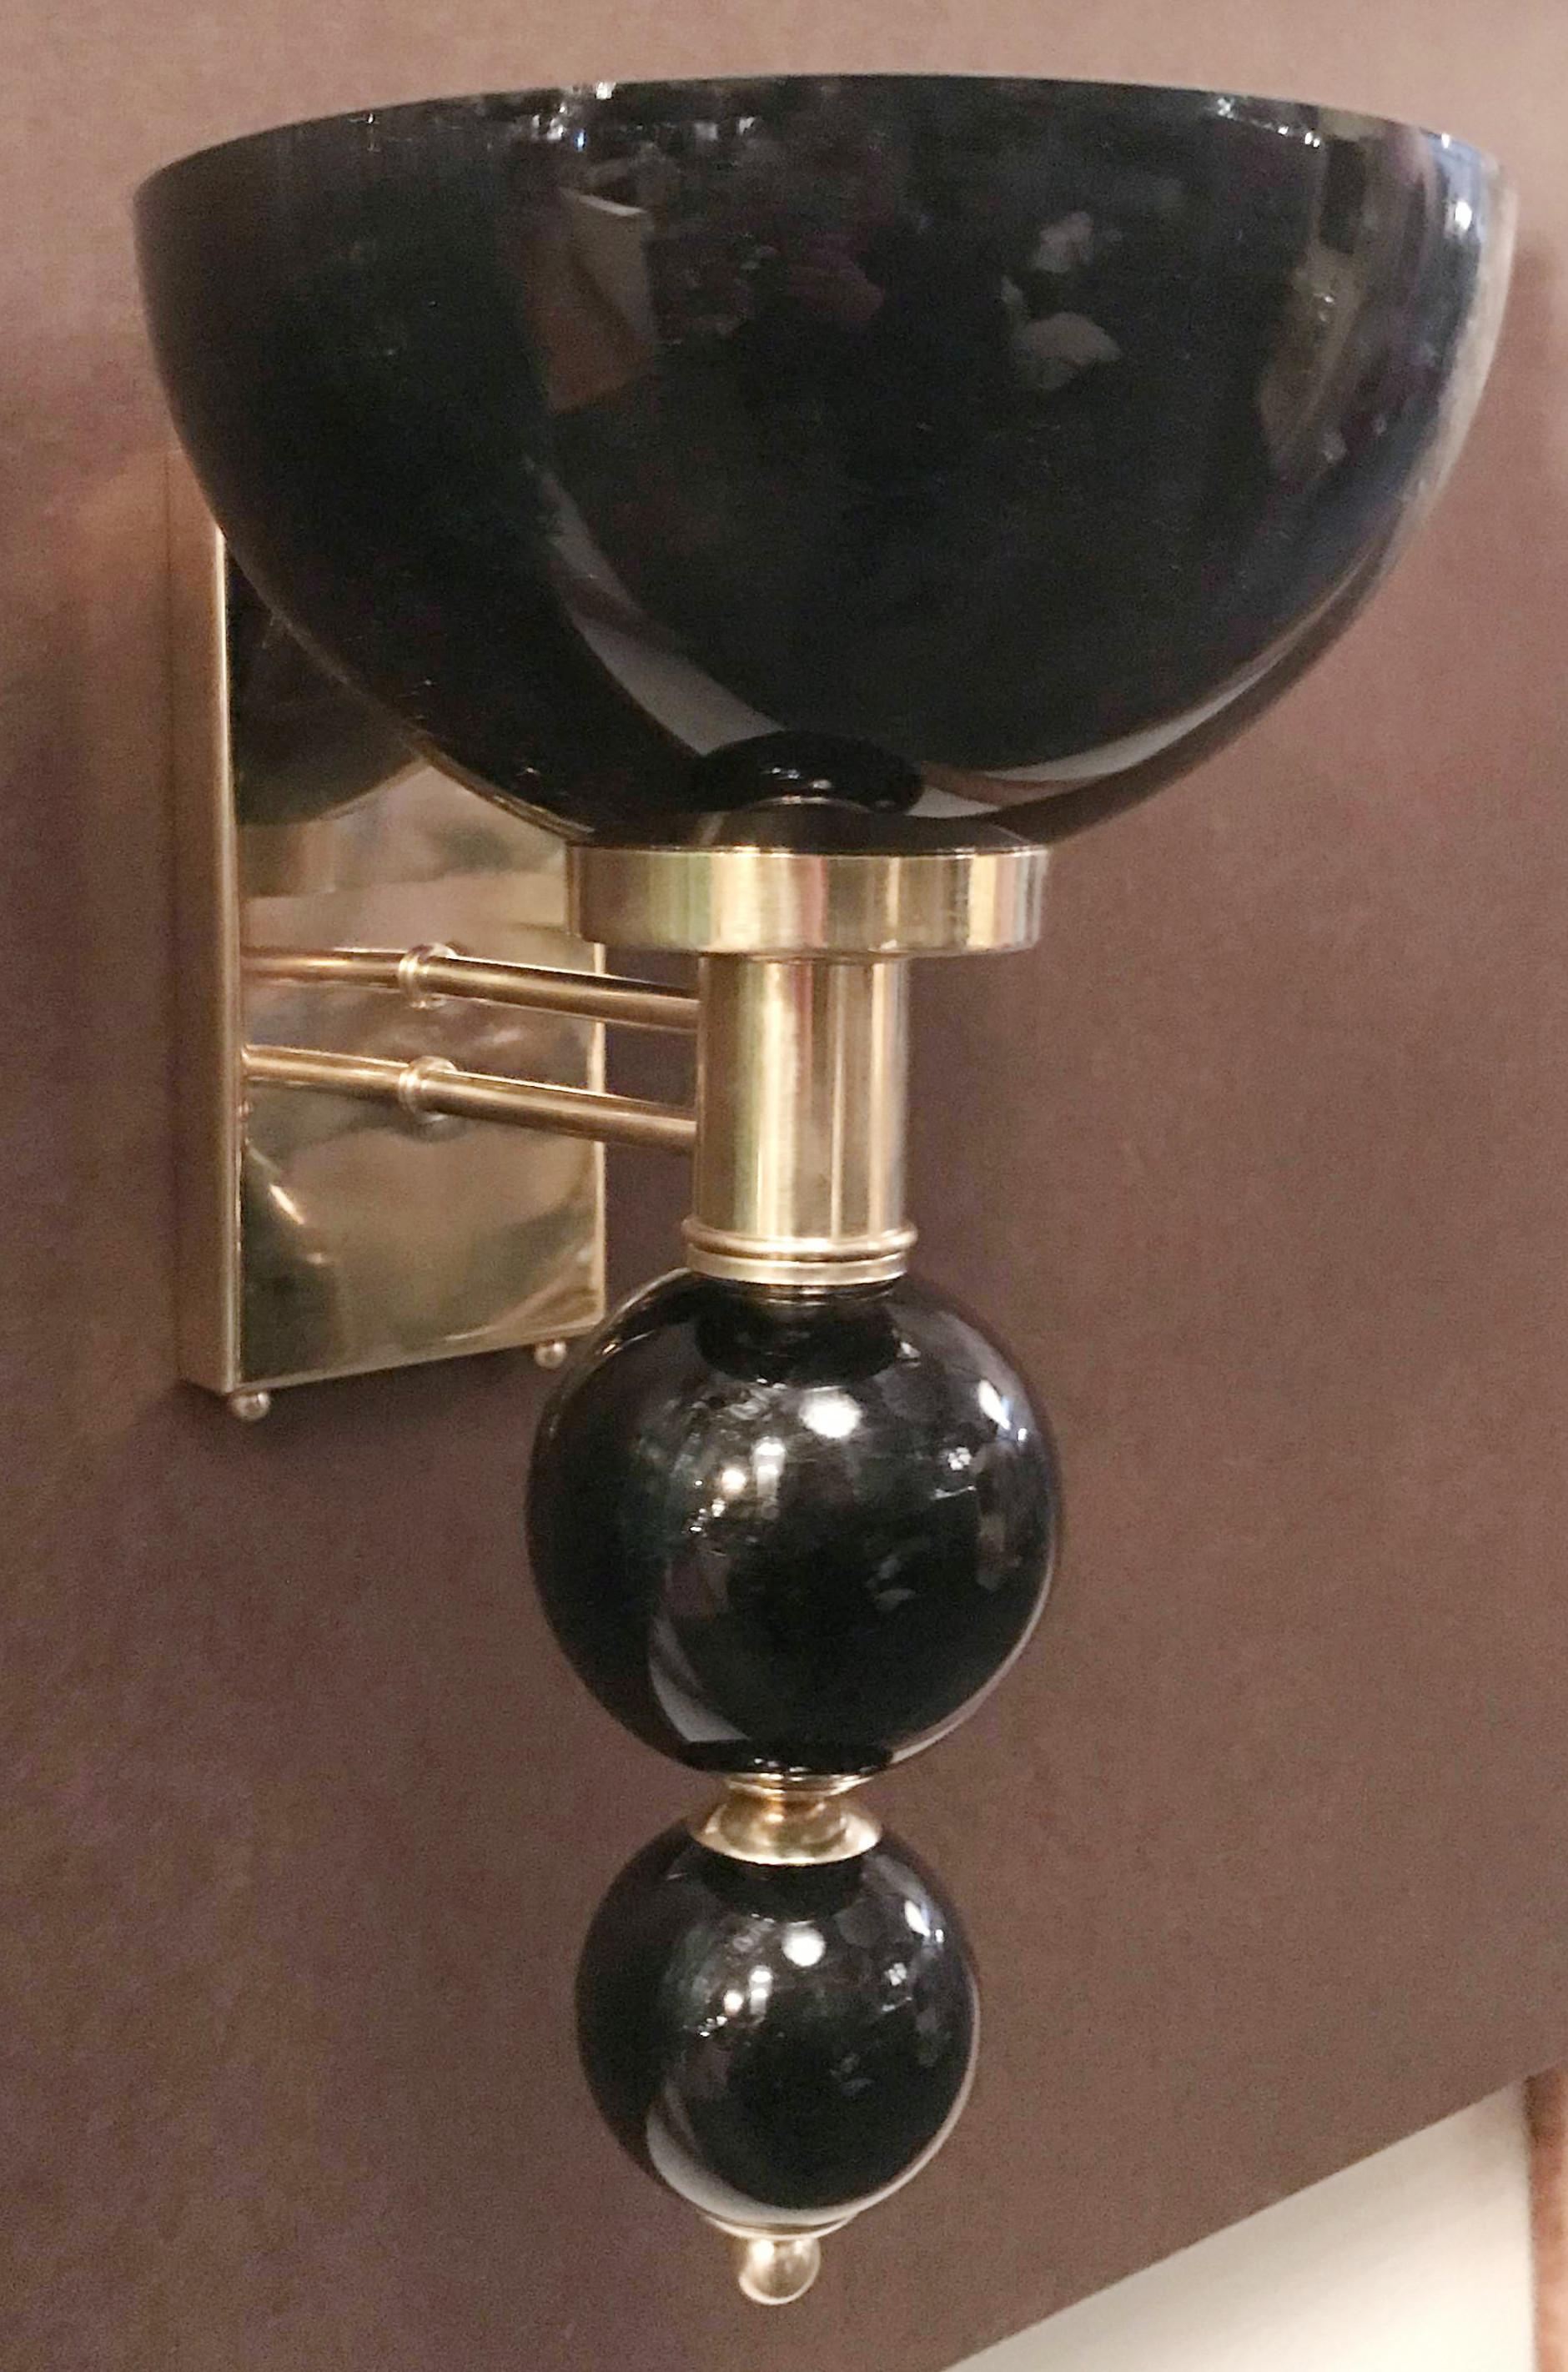 Italian wall light with hand blown black Murano glass, mounted on polished brass metal finish frame / Designed by Fabio Bergomi for Fabio Ltd / Made in Italy
1 light / E26 or E27 type / max 40W 
Height: 16 inches / Width: 10 inches / Depth: 11